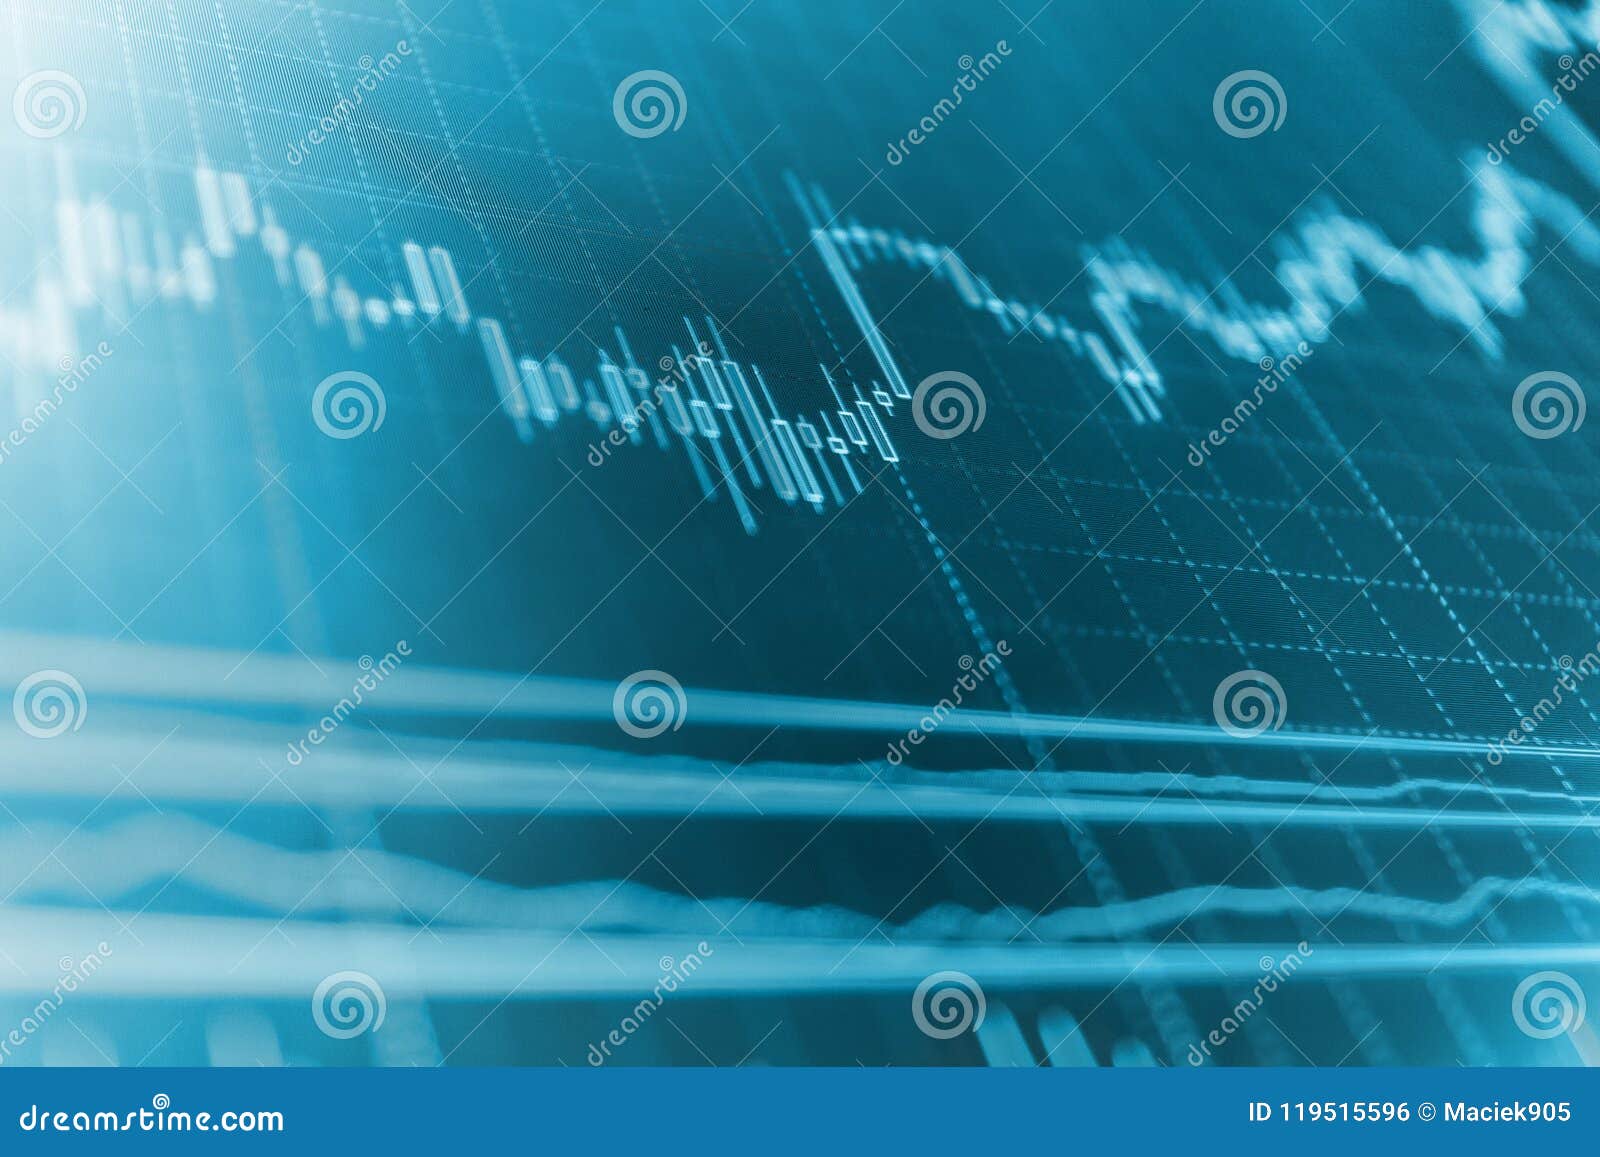 business graph with arrows tending downwards. blue screen of finance data. finance background data graph.